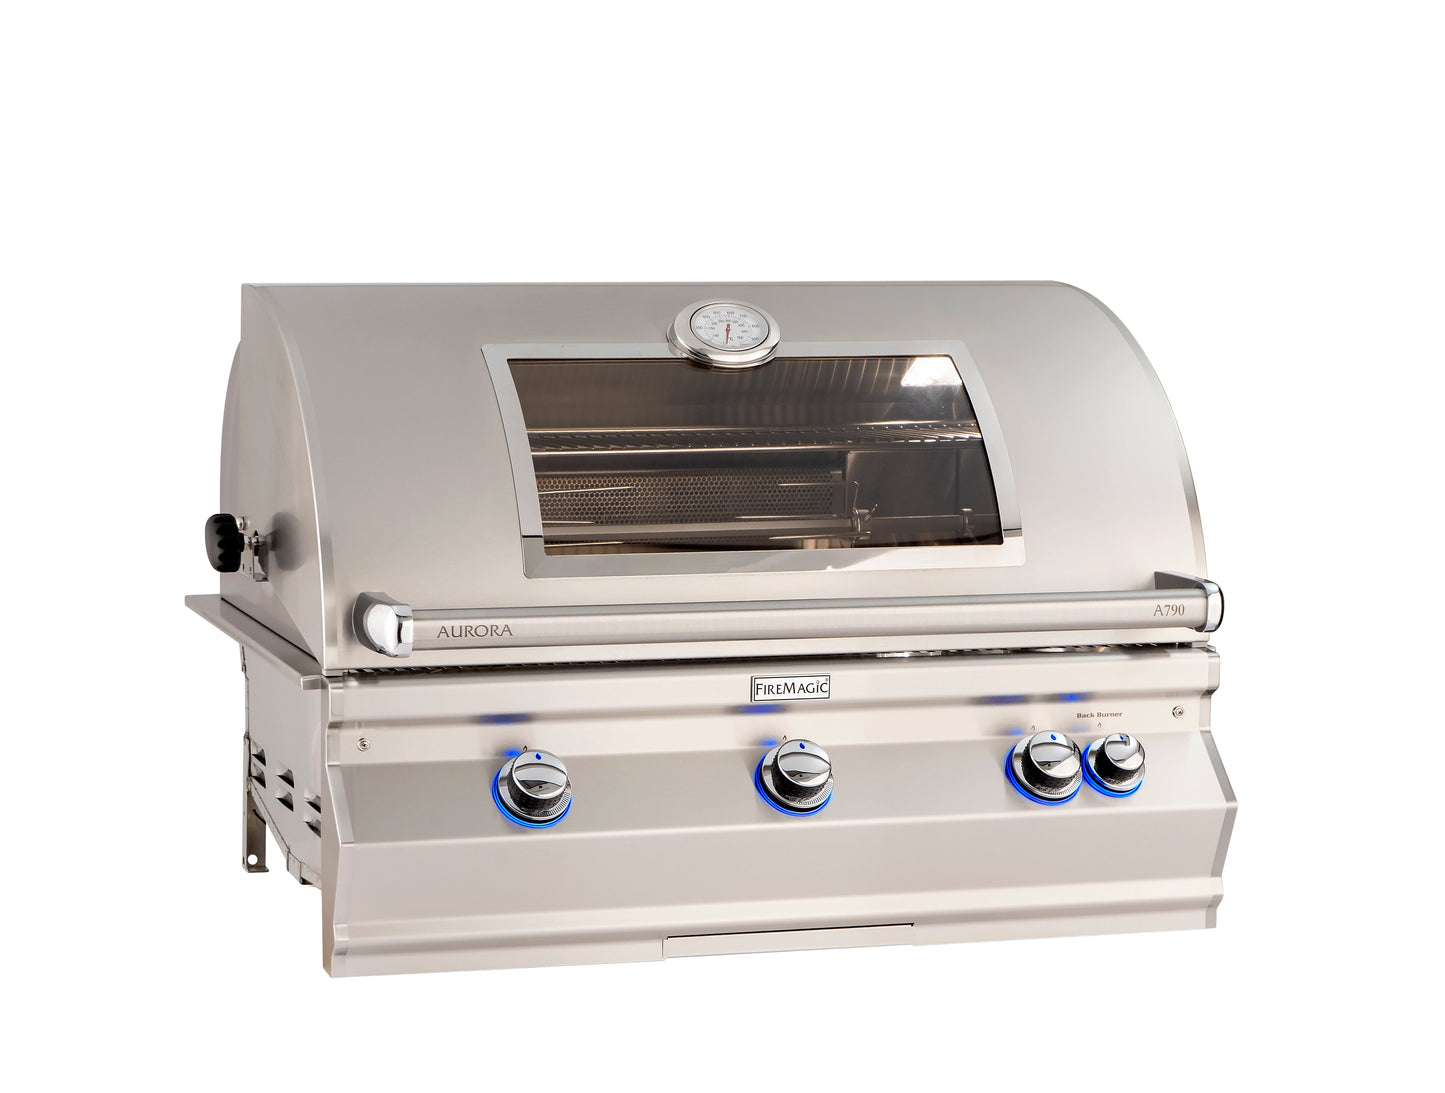 Firemagic Aurora 36 Inch Built-In Gas Grill with Magic Viewing Window | A790i-8EAN-W |